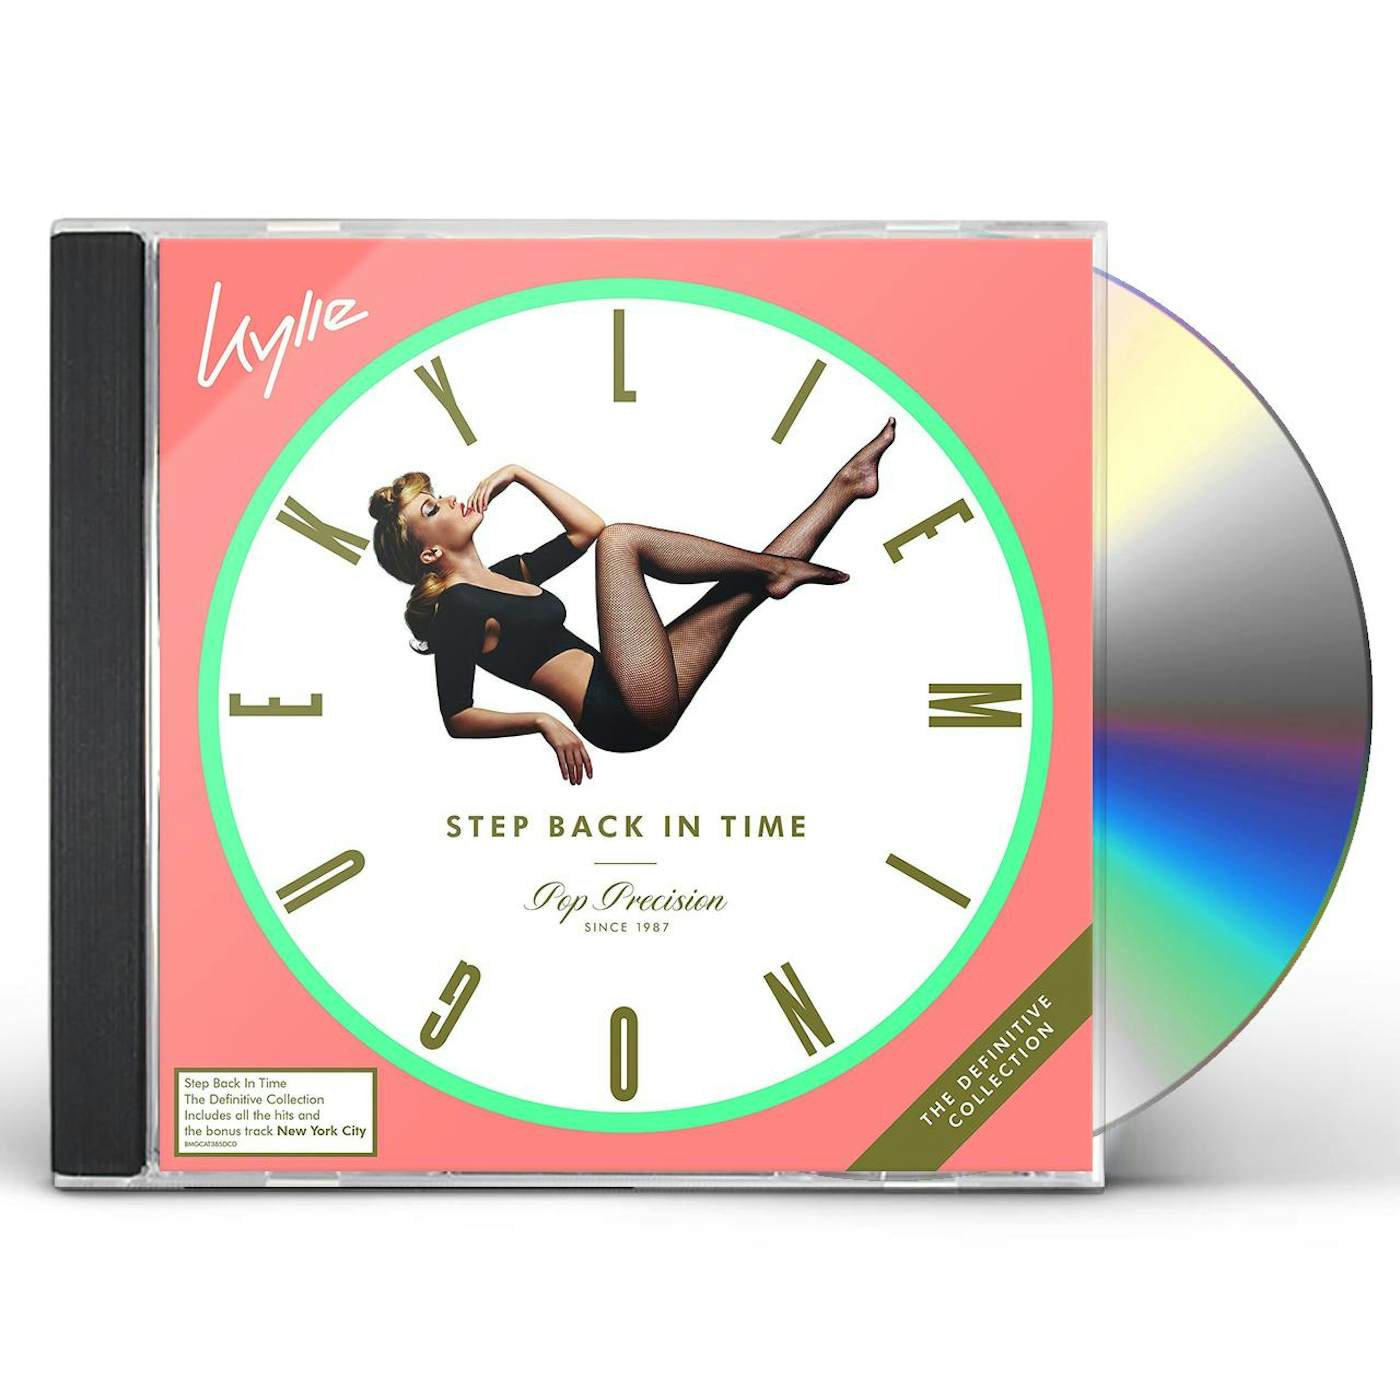 Kylie Minogue STEP BACK IN TIME: THE DEFINITIVE COLLECTION (DELUXE 2CD/BOOK) CD